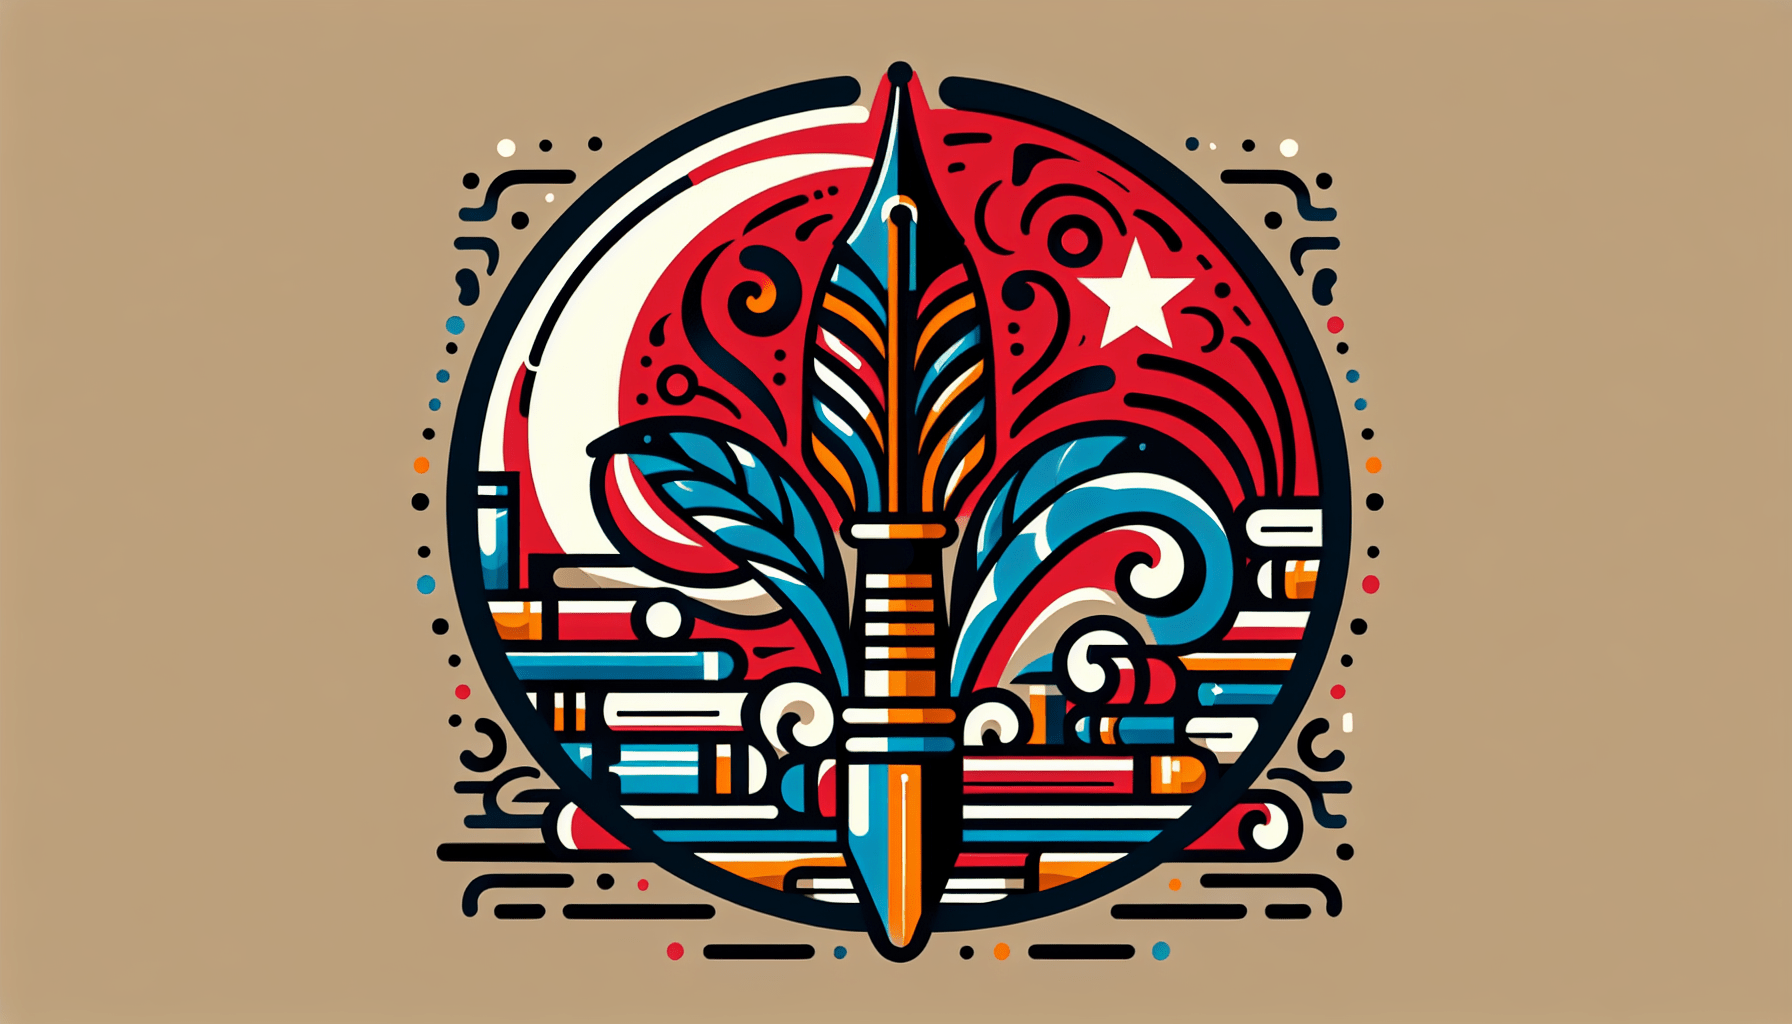 Stylized illustration of a fleur-de-lis centered on a circular background with books, a crescent moon, and a star in vibrant colors and intricate patterns, evoking the rich artistic heritage of Turkey.